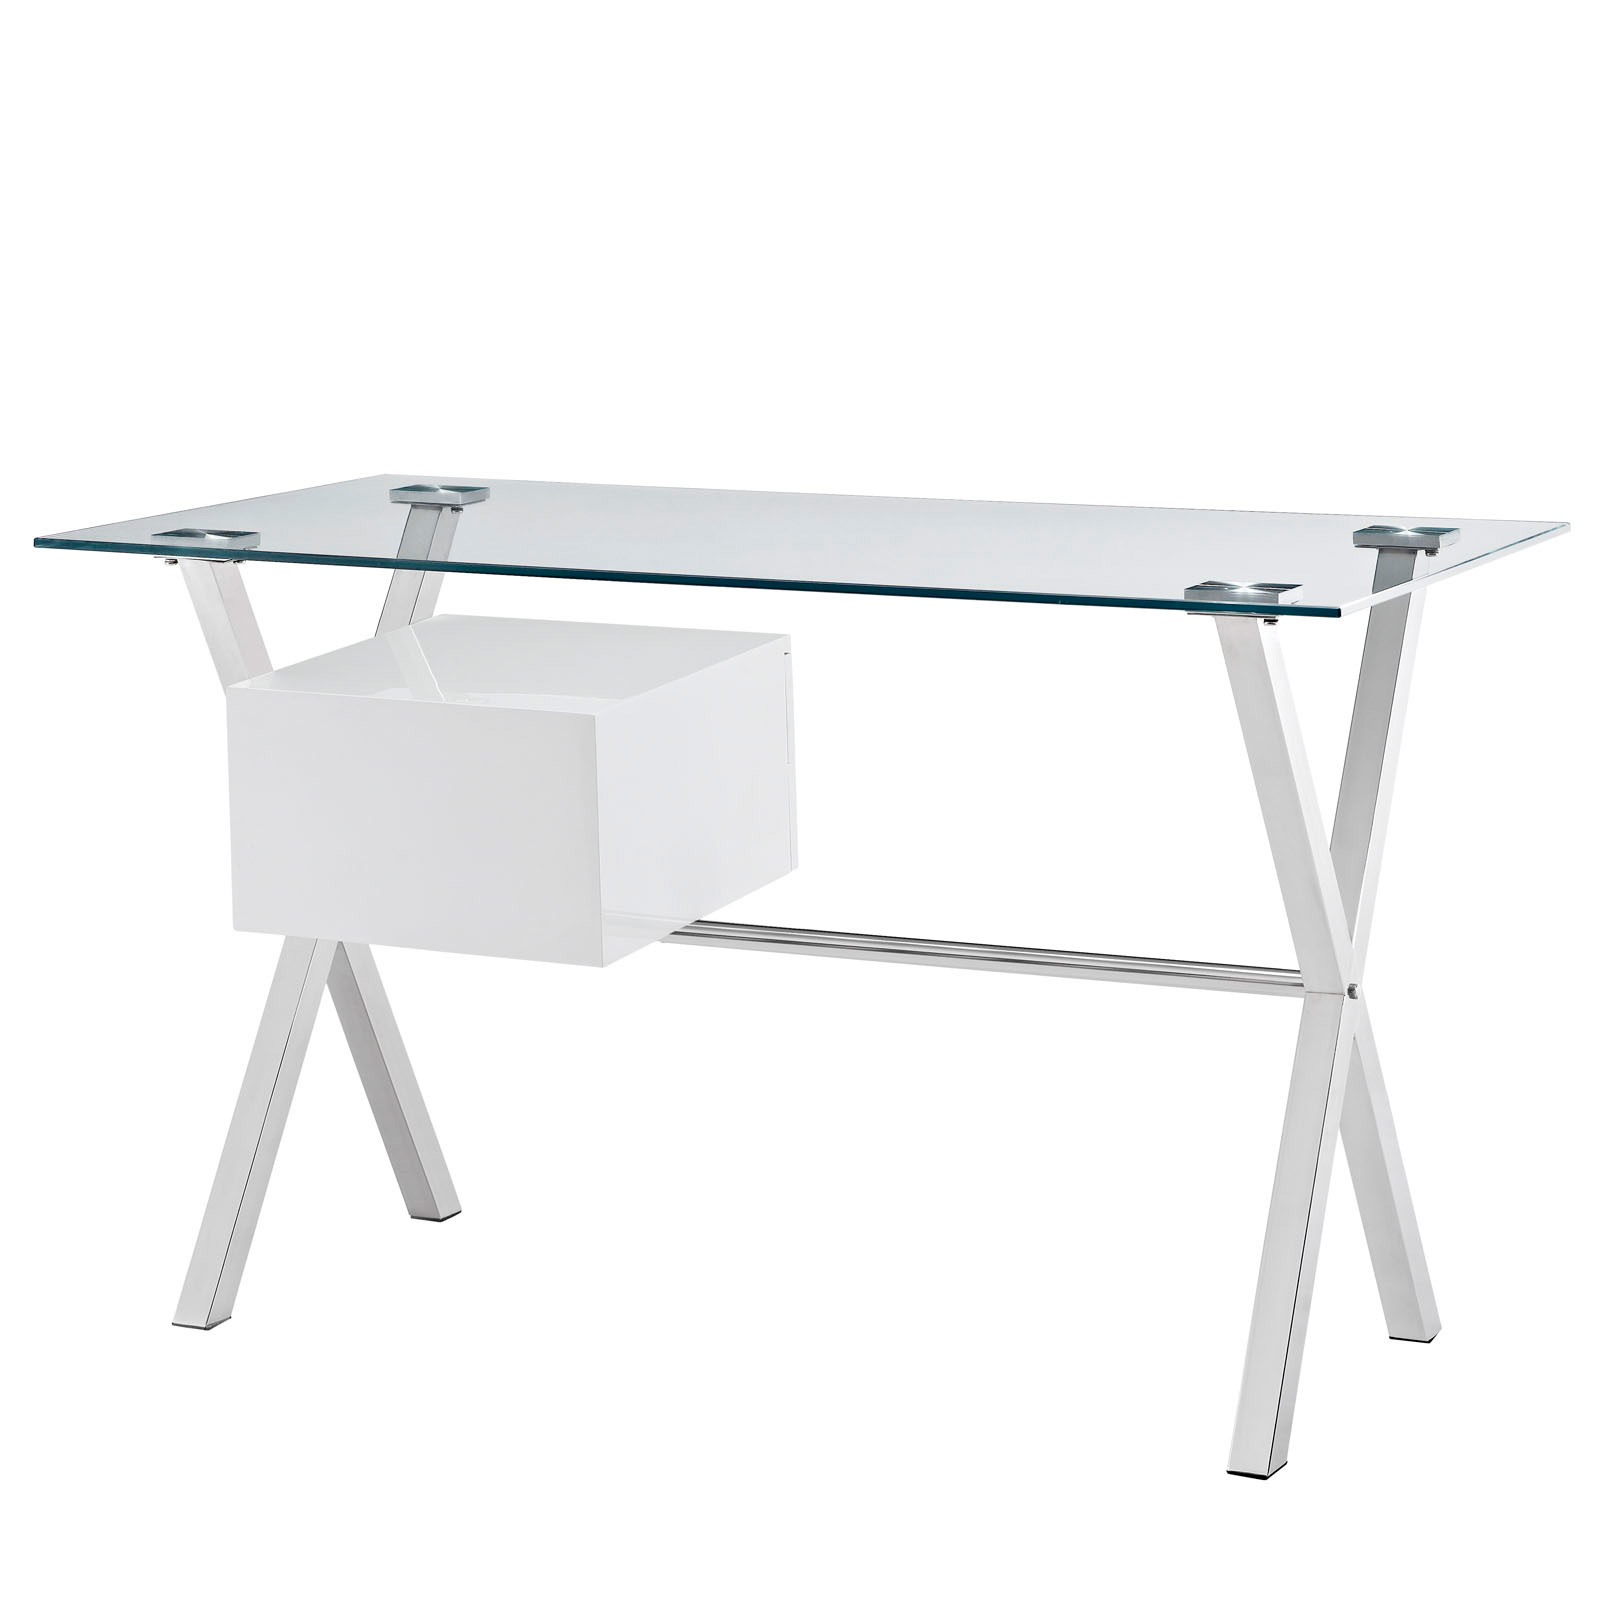 Space saving desk from Modway - Back View - Shown in White